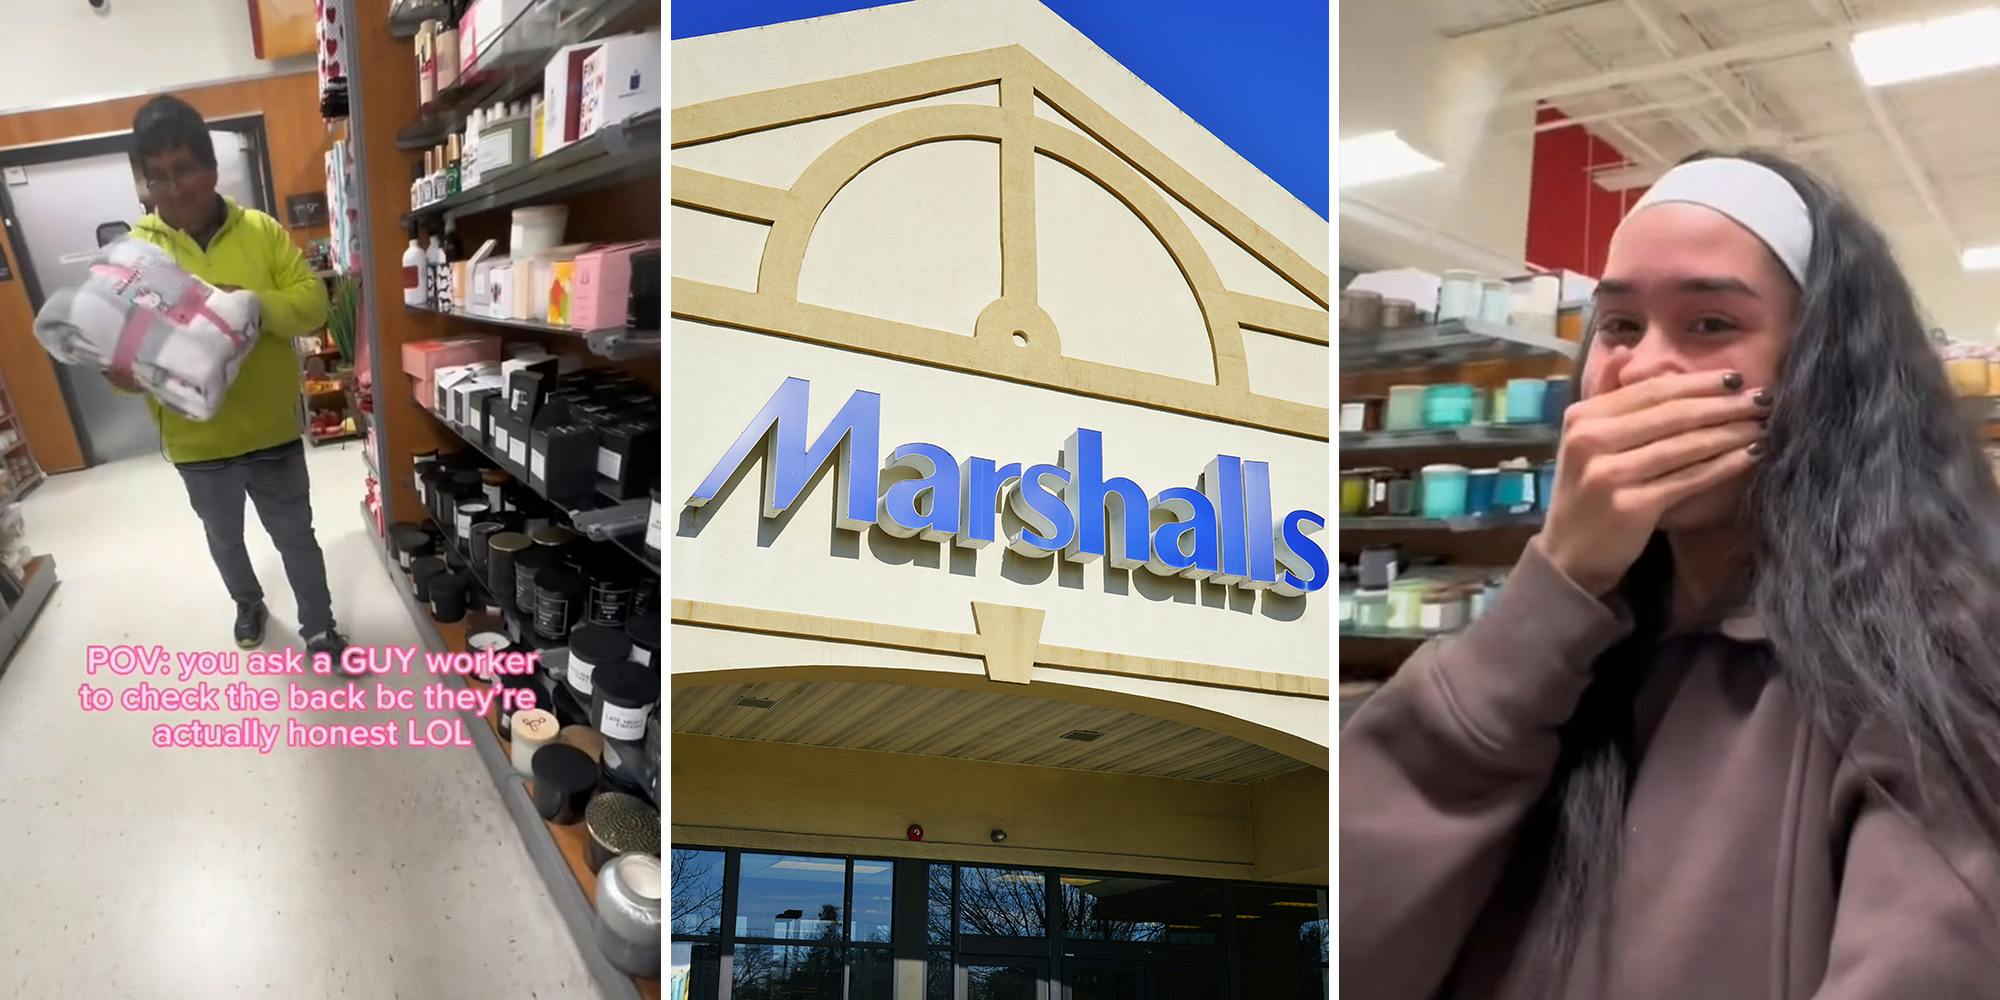 Marshalls workers criticize customer after she says only male workers are honest about 'checking in the back'